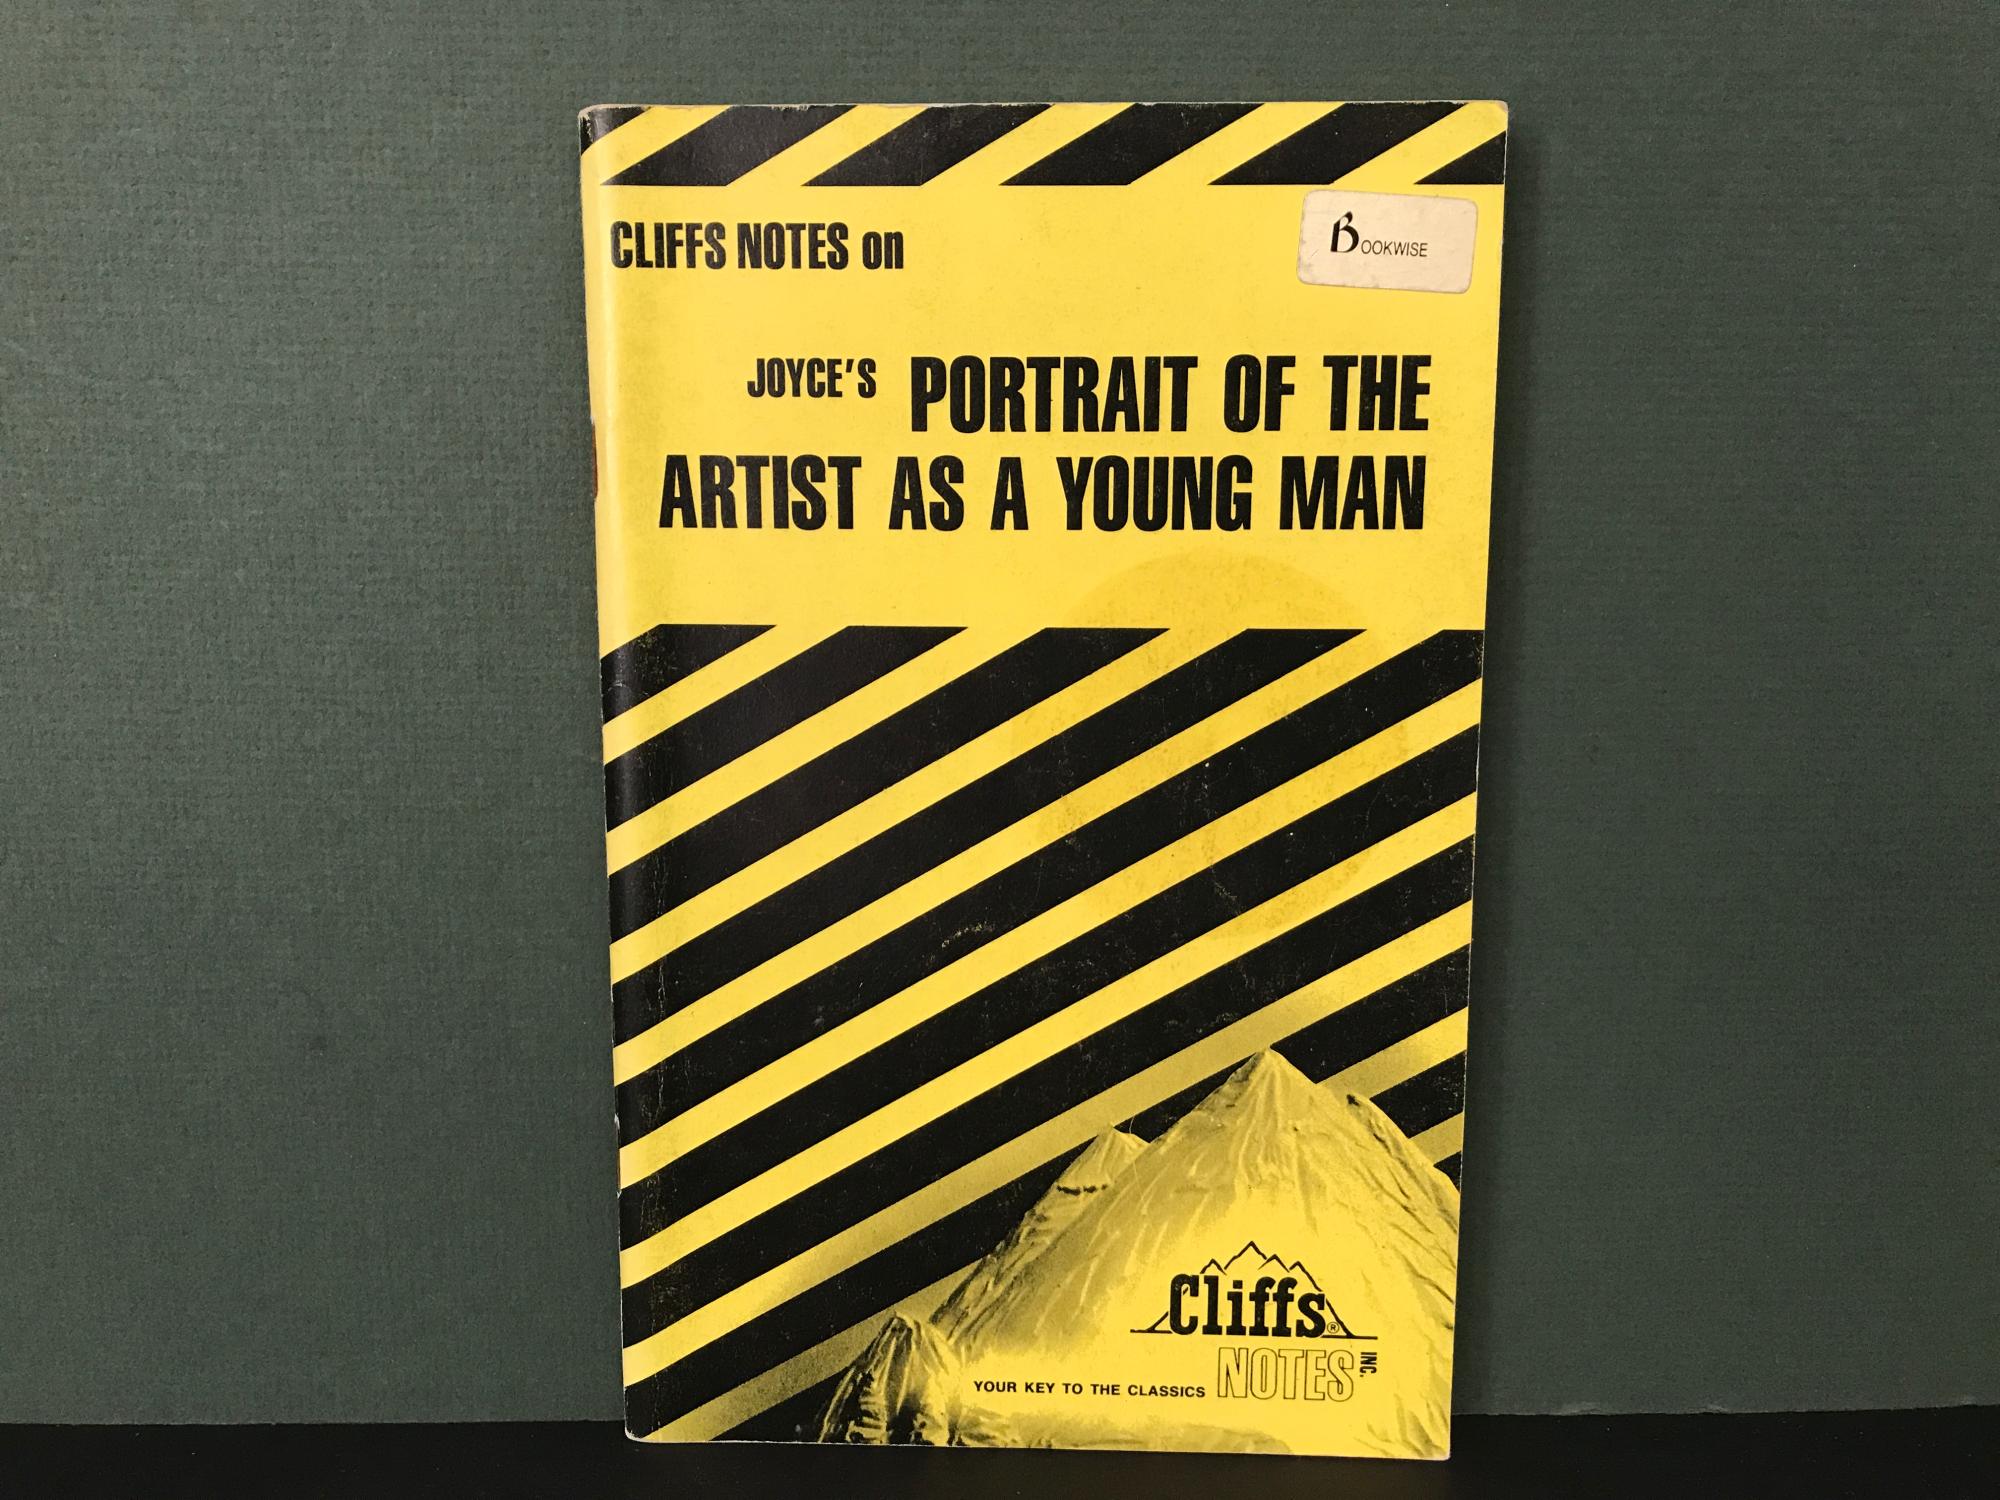 Cliffs Notes on Joyce's A Portrait of the Artist as a Young Man - Zimbaro, Valerie Pursel (James Joyce)